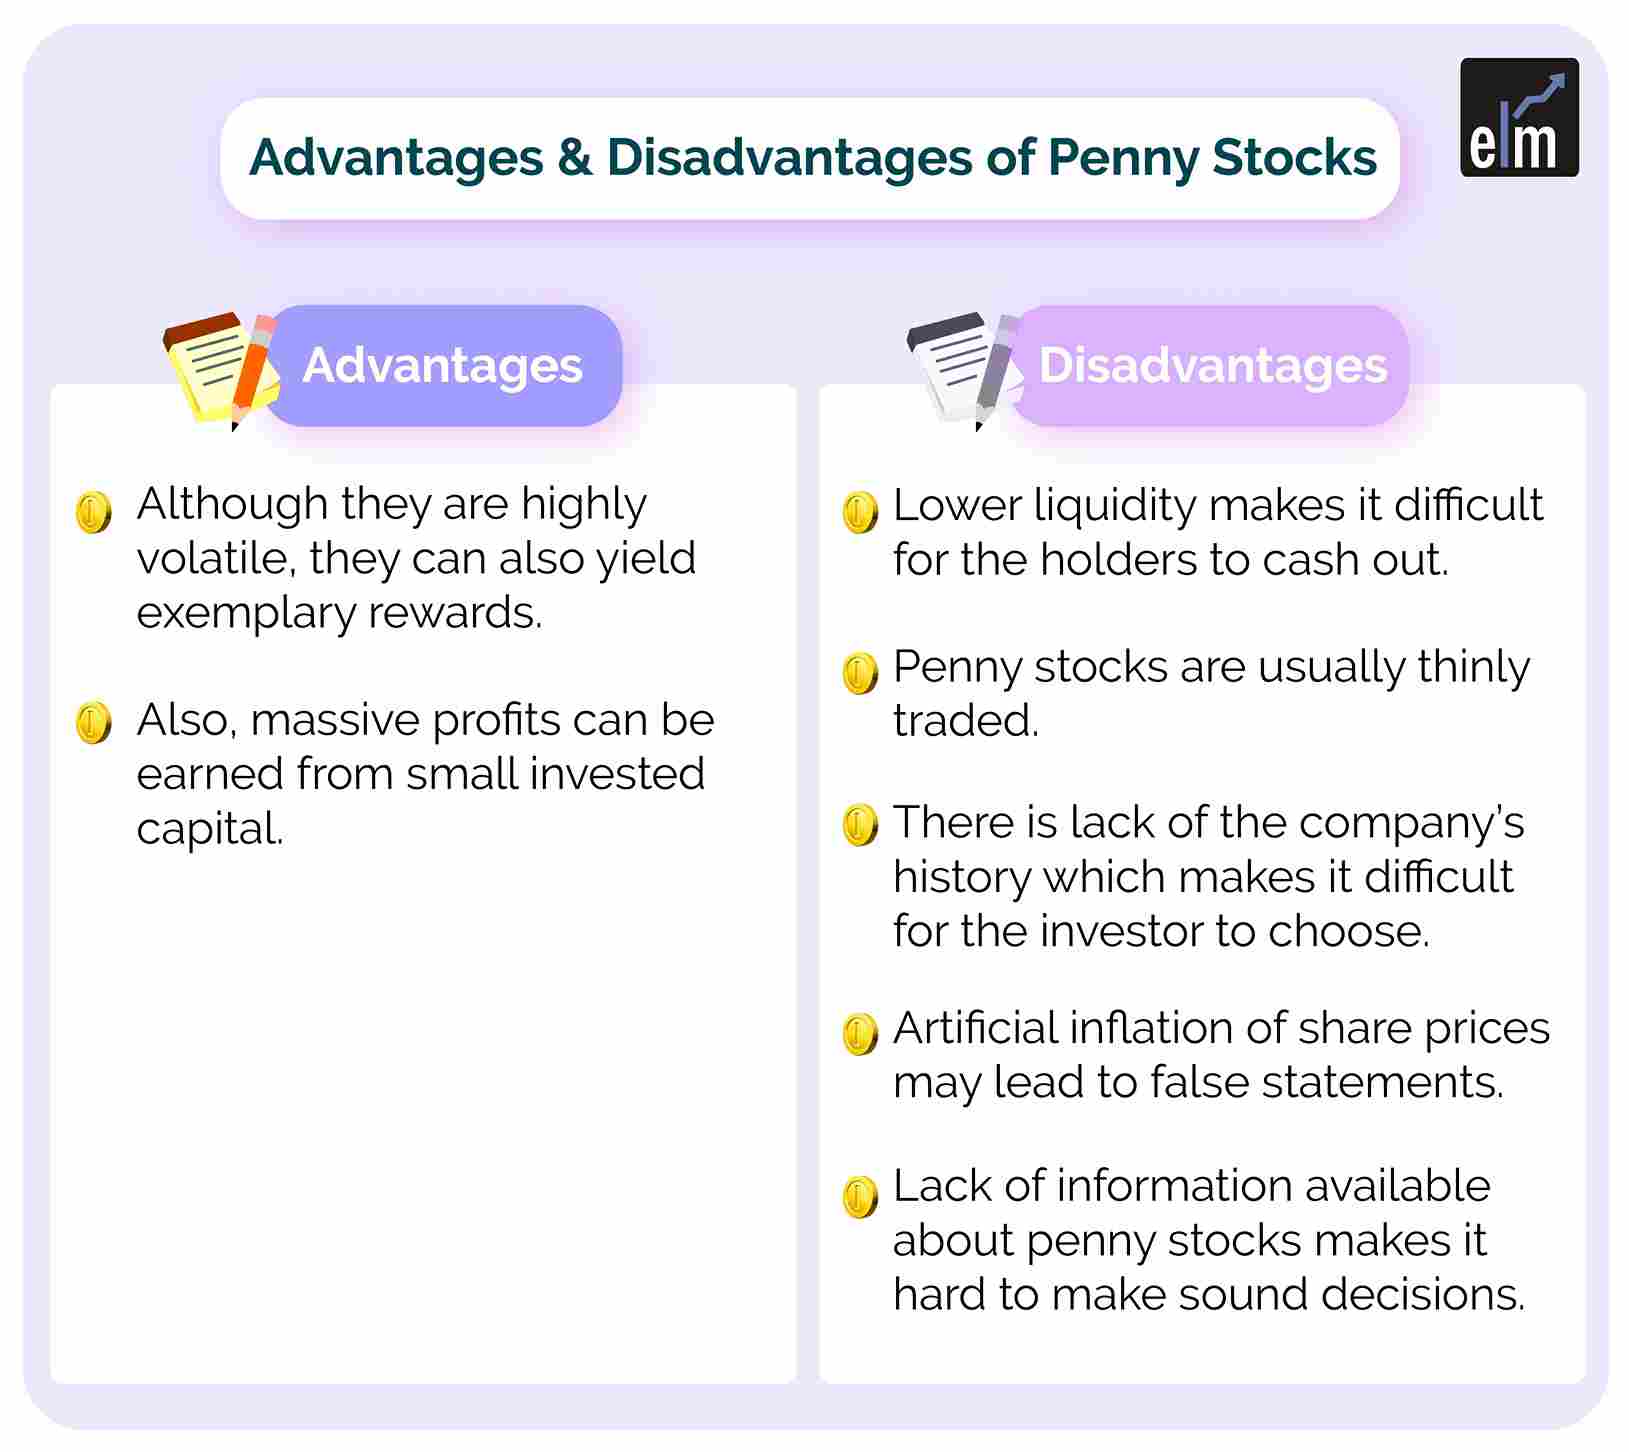 Image showing Advantages and disadvantages of Penny stocks